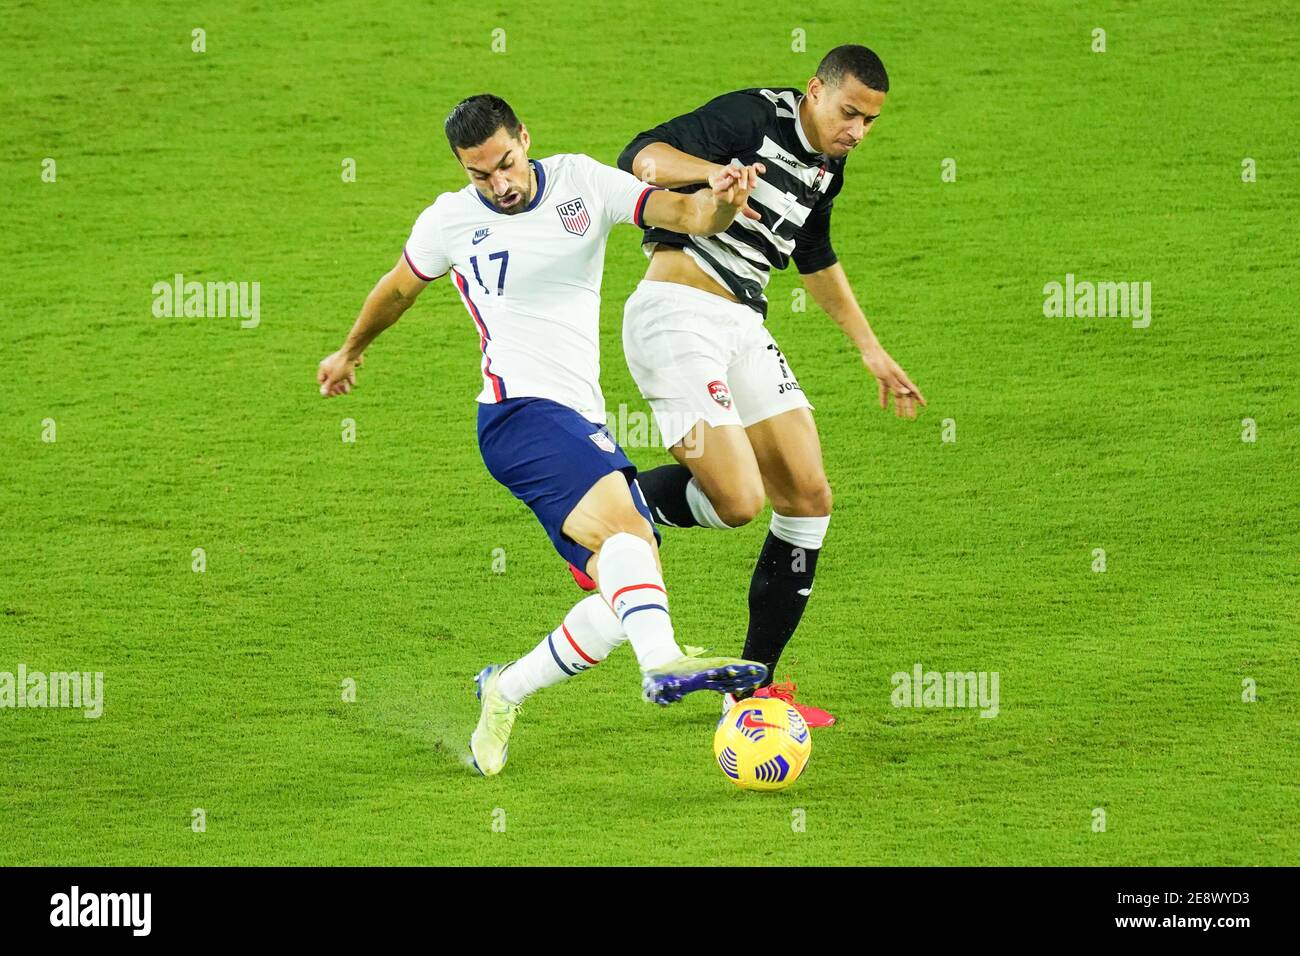 Orlando, Florida, USA, January 31, 2021, USA midfielder Sebastian Lletget #17 attempt to steal the ball during an International Friendly Match against Trinidad and Tobago.  (Photo Credit:  Marty Jean-Louis) Stock Photo